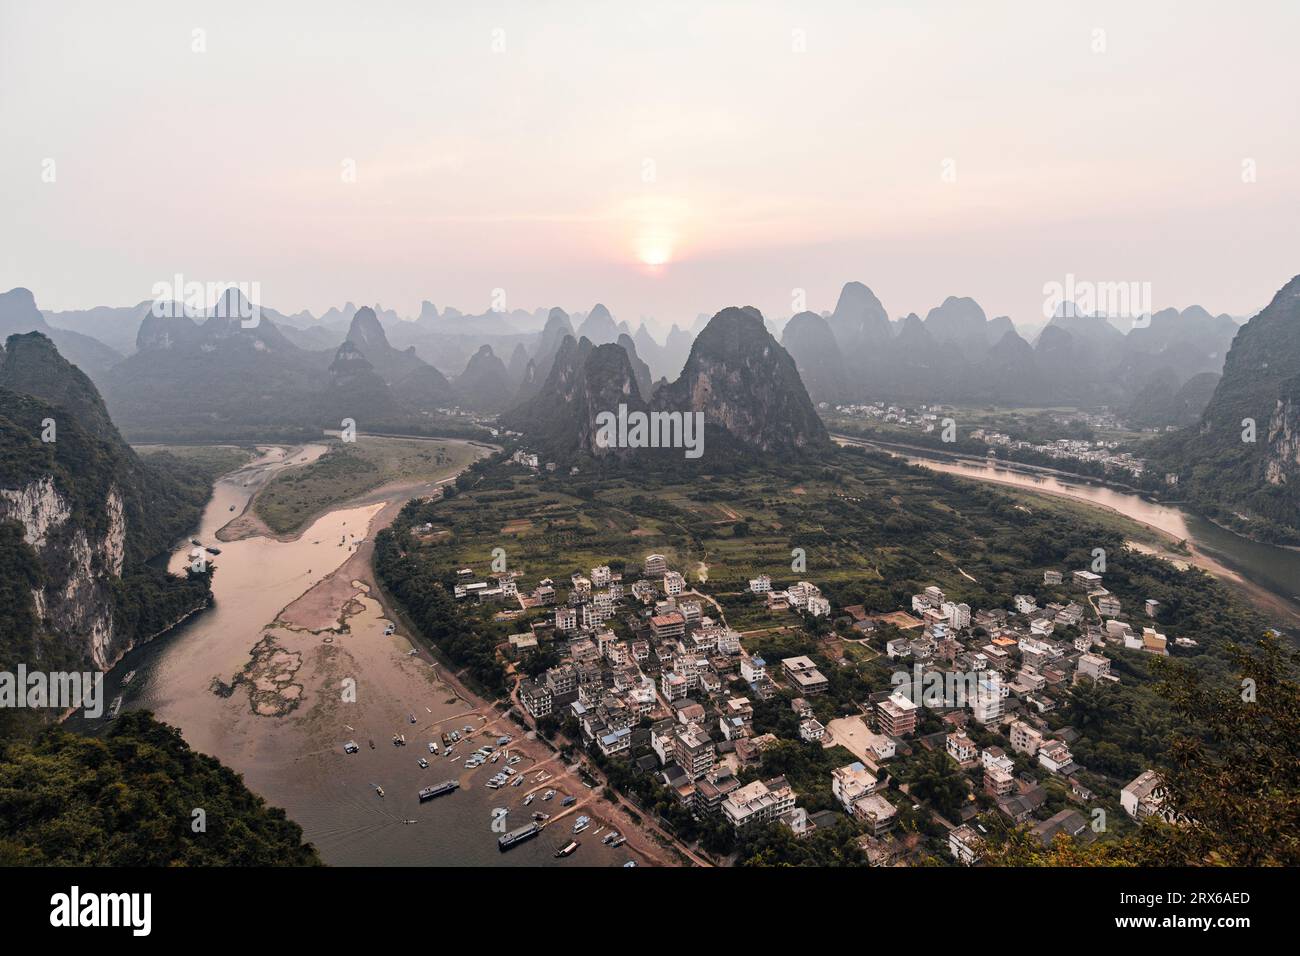 Stadt Xingping mit Bergen in Guilin, China Stockfoto